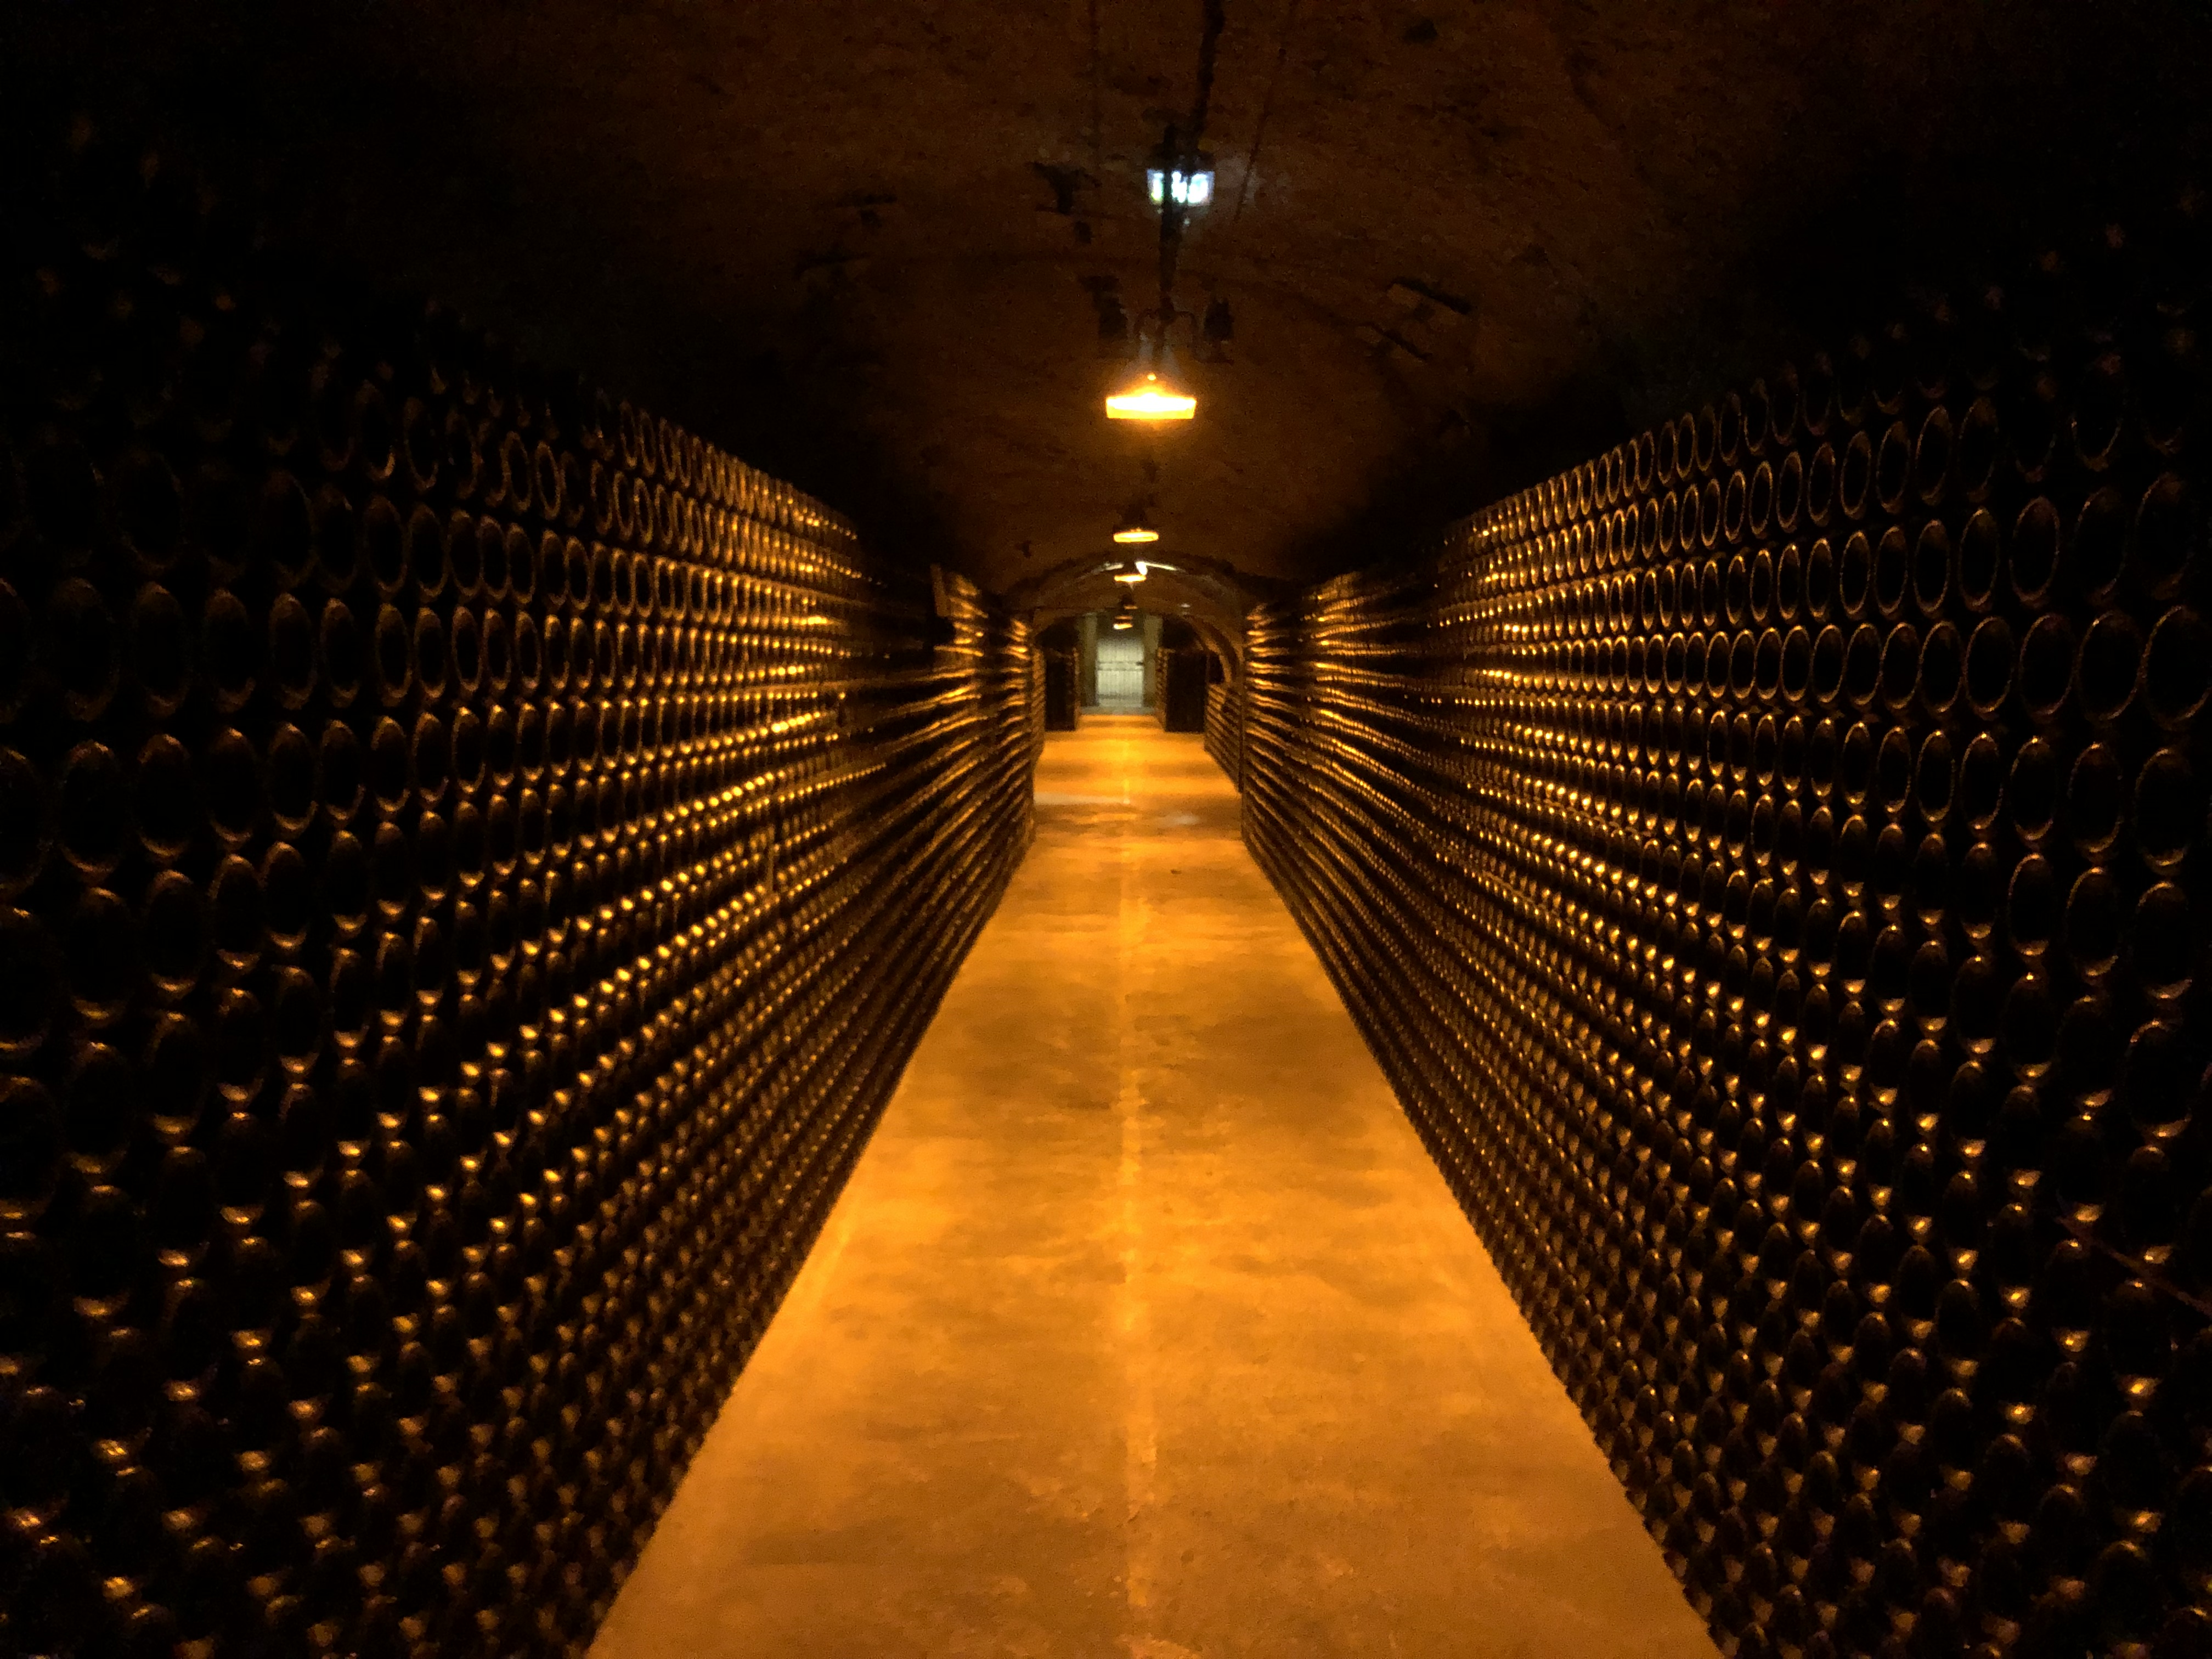 Champagne in Epernay: The Moet & Chandon Cellar Tour and Tasting